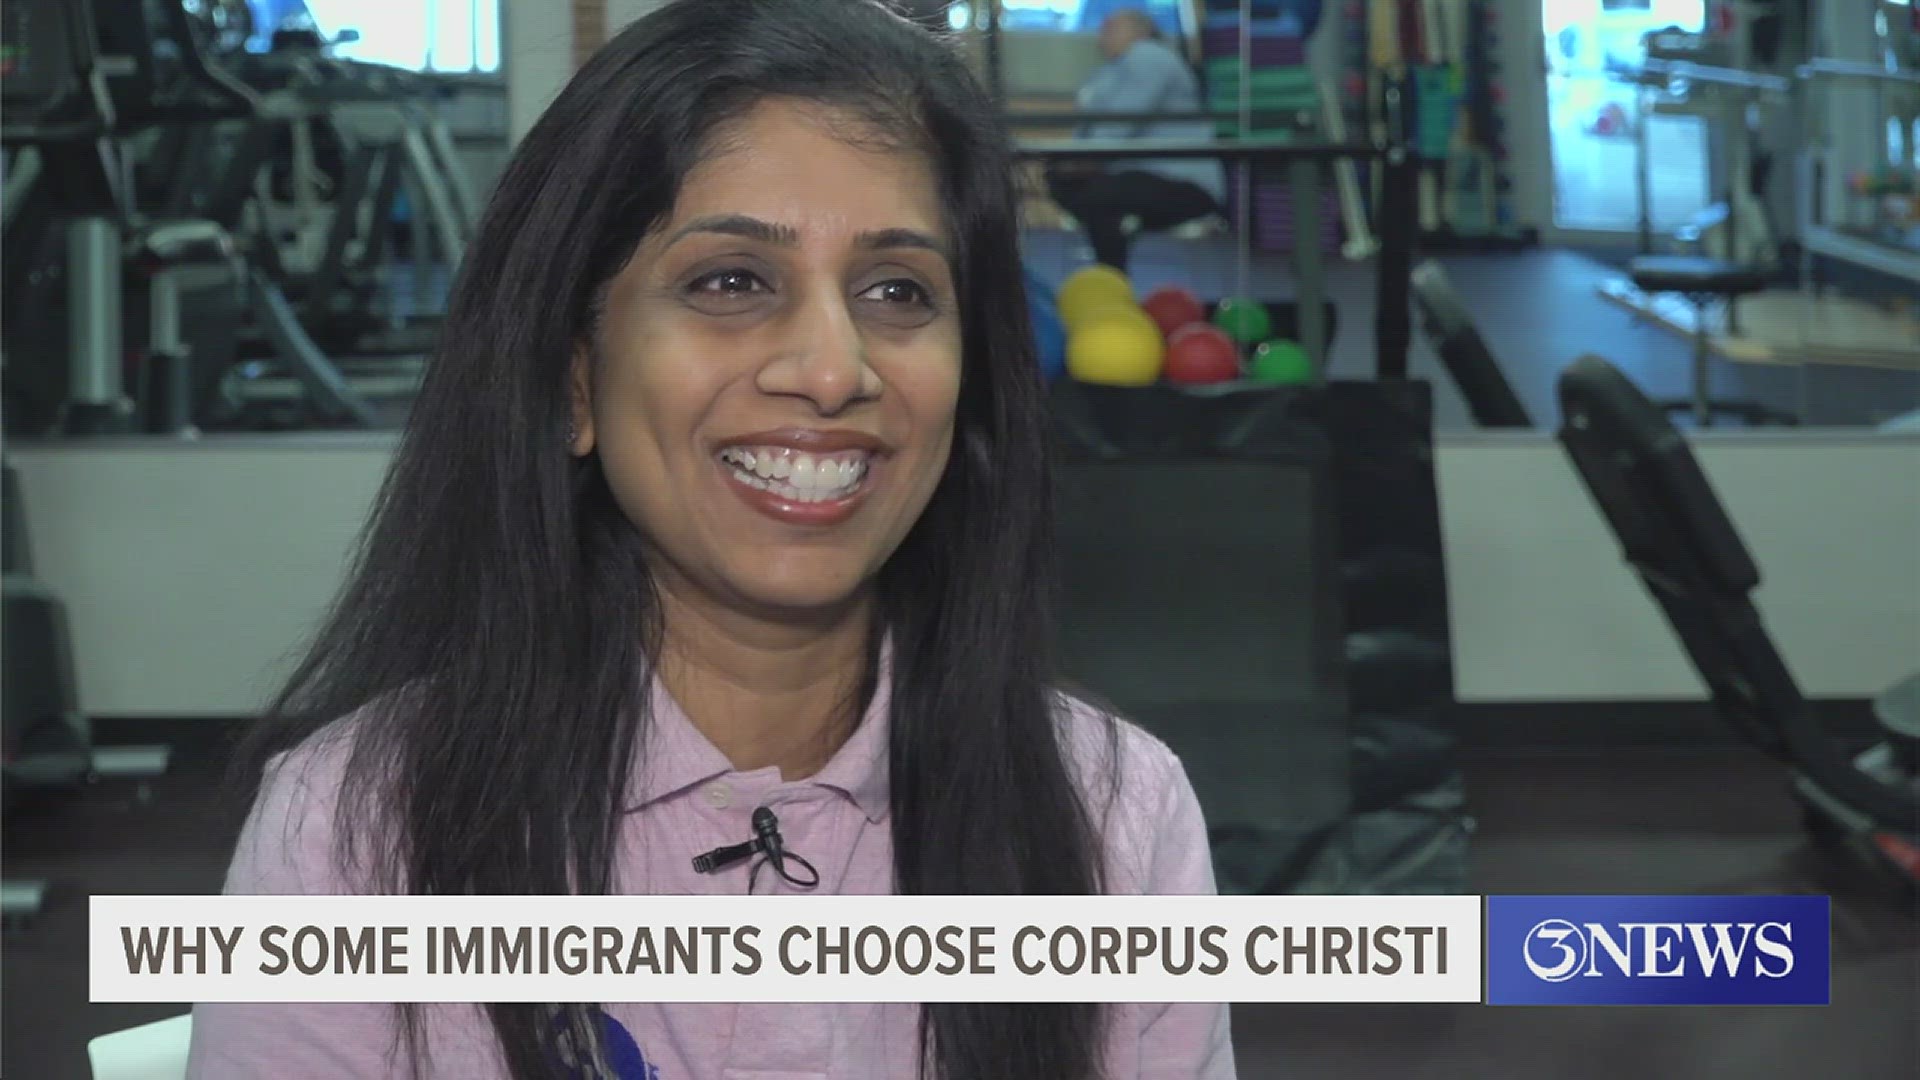 For some, choosing Corpus Christi wasn't a hard chose at all.